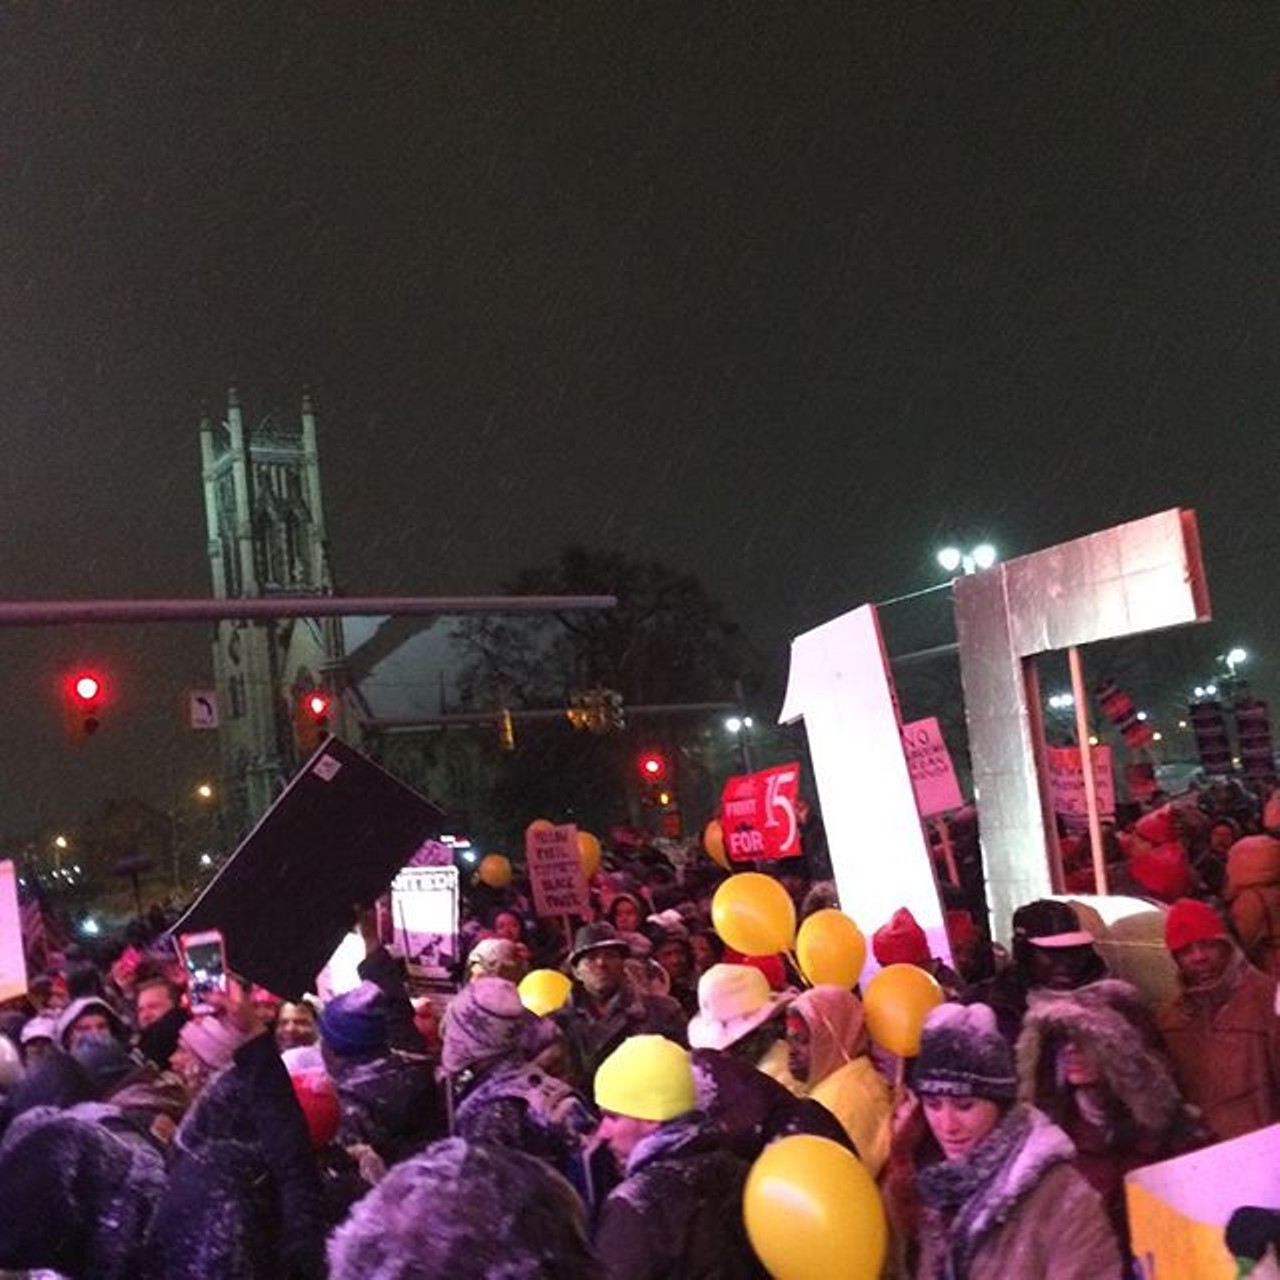 The Fight for $15 movement was well represented among the protesters on Woodward, carrying signs demanding a higher minimum wage and an end to stagnant working class pay.
Photo via Instagram user @joemyersflieshigher